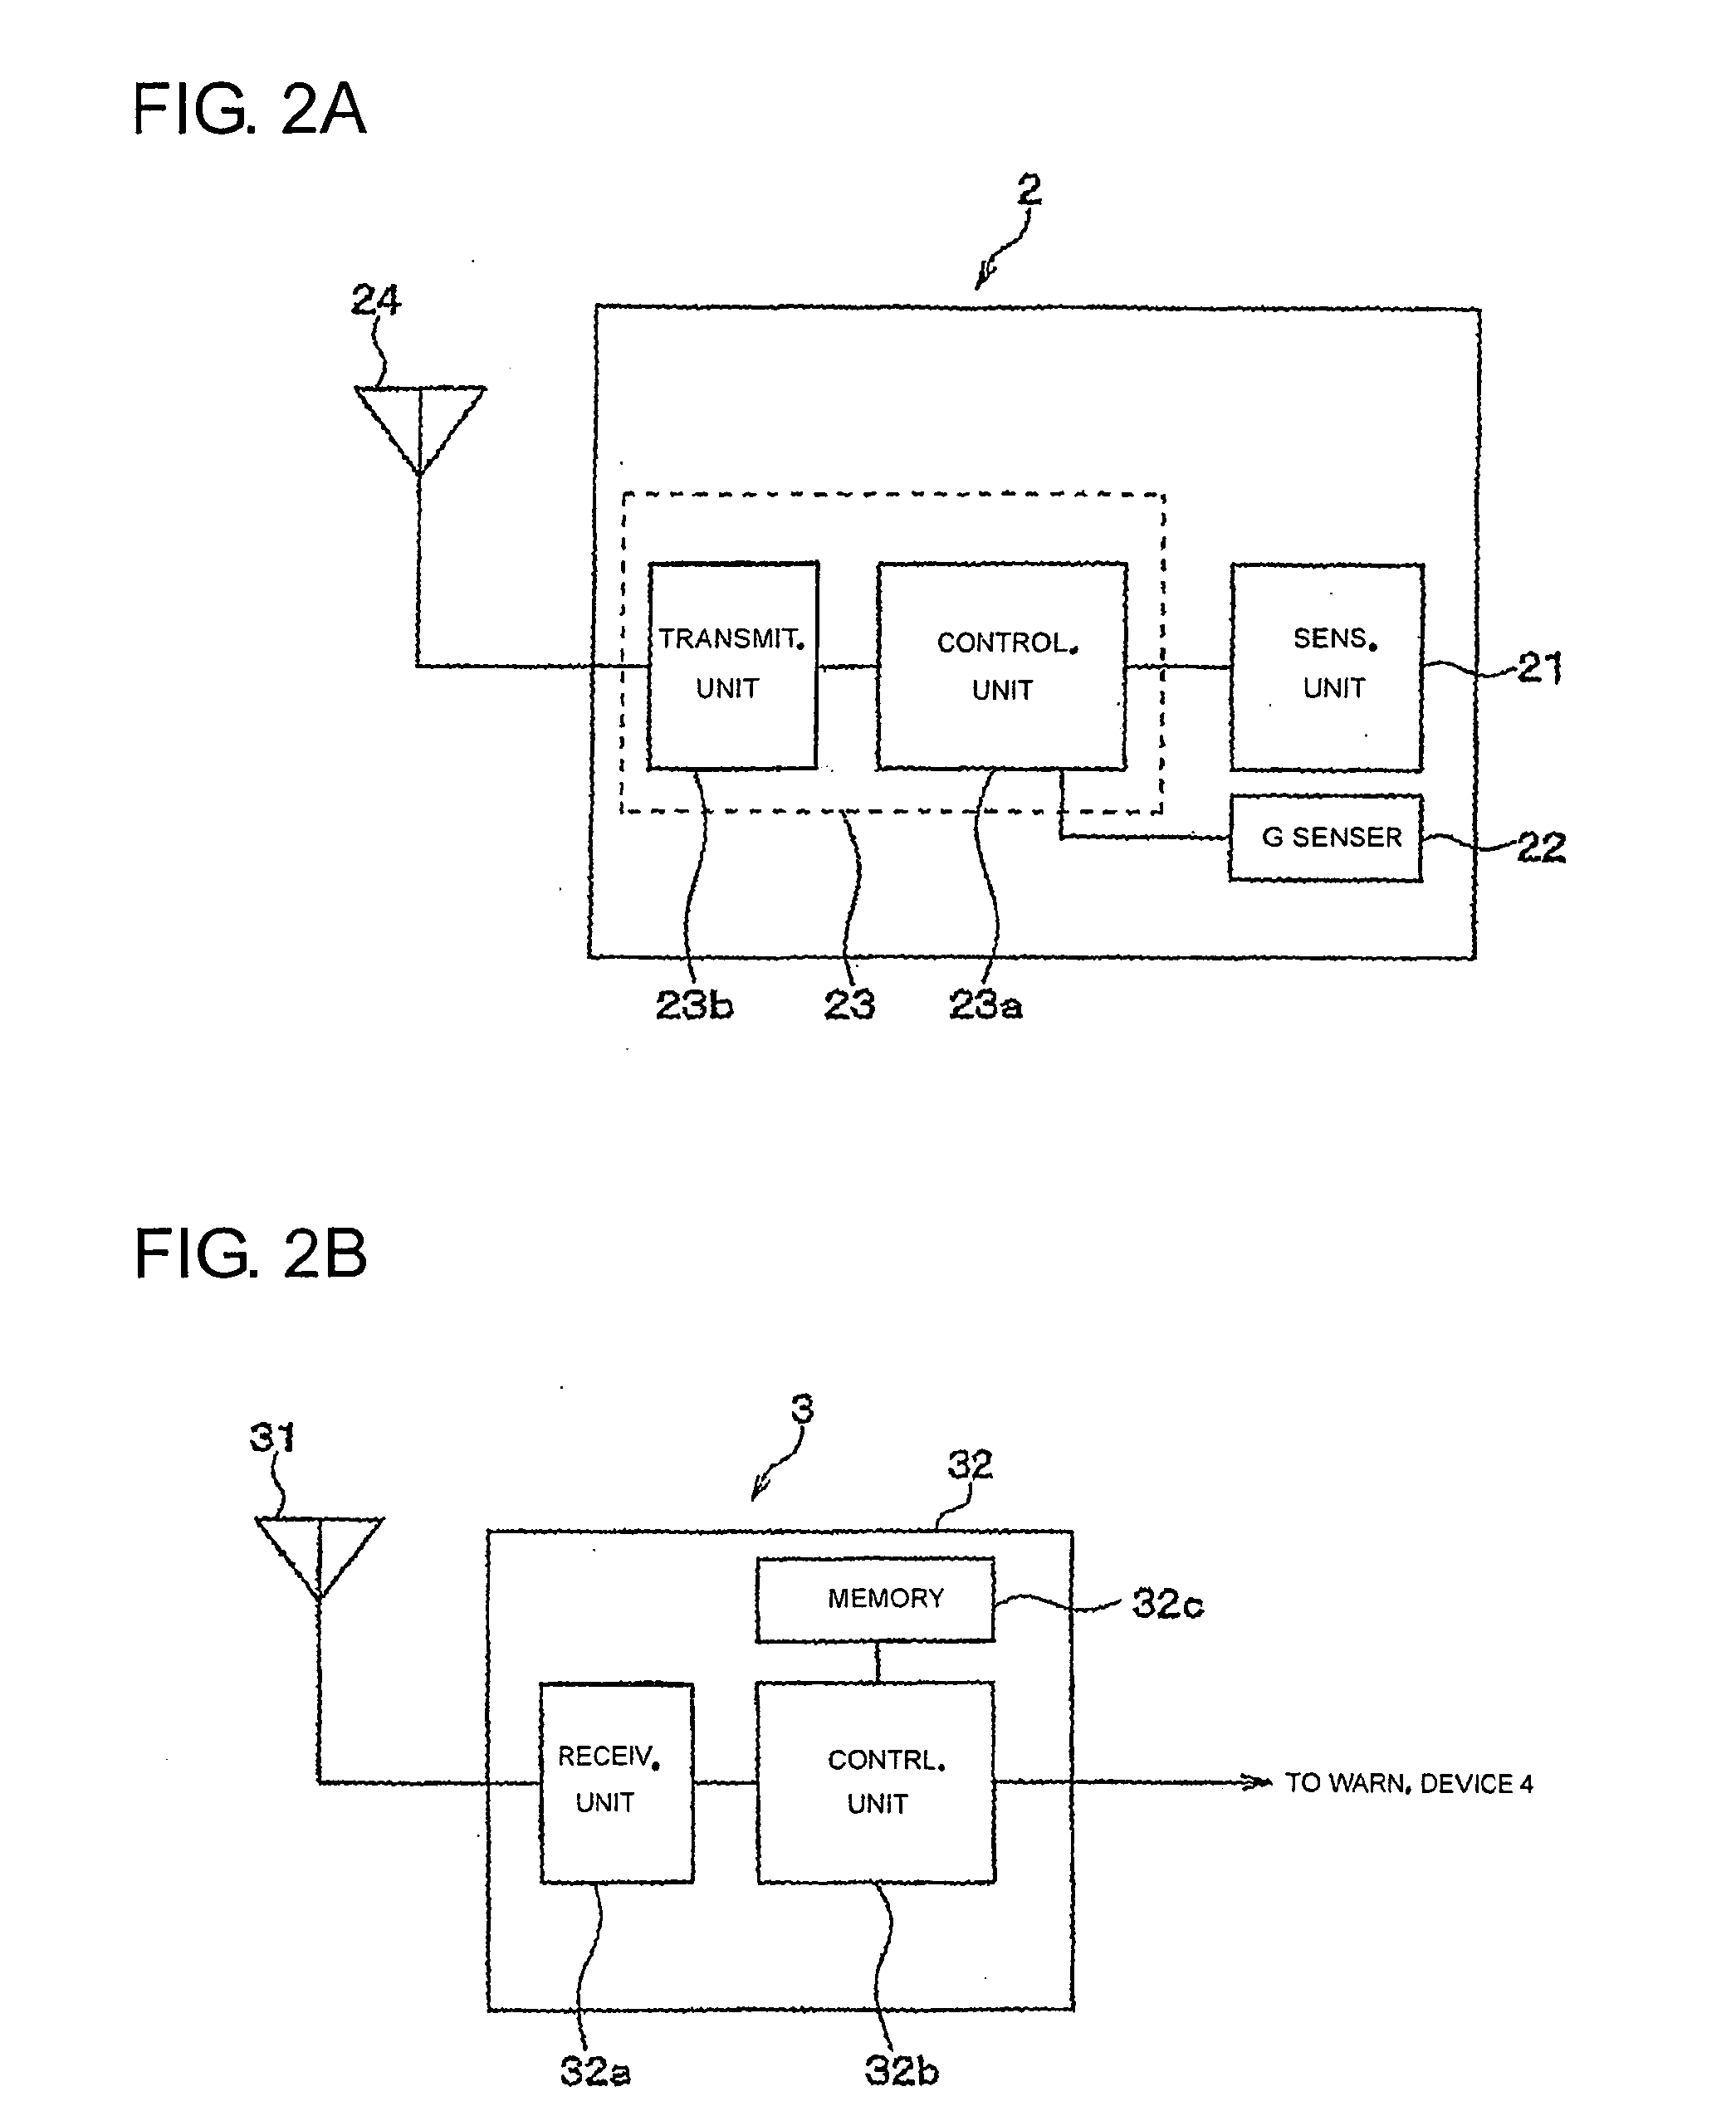 Tire inflation pressure sensing apparatus with high reliability and power-saving capability